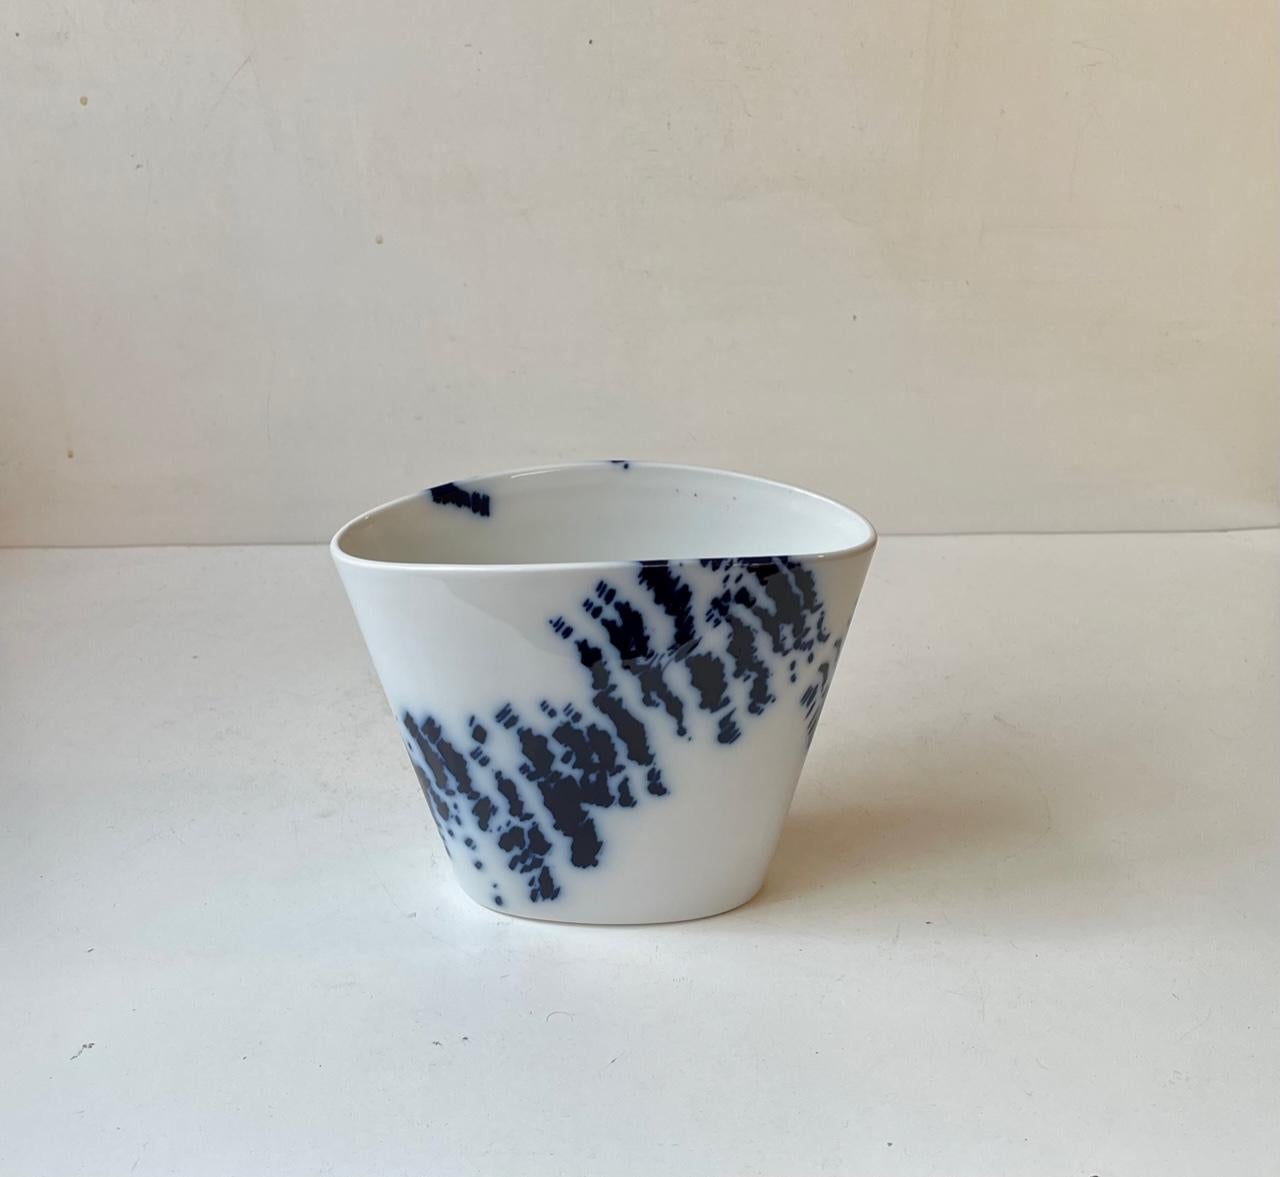 Modern porcelain vase with blue decor designed by the danish ceramist Ivan Weiss and manufactured by Royal Copenhagen during the 1980s. Fully signed, numbered and marked to the base. Measurements: 15/18/9.5 cm.